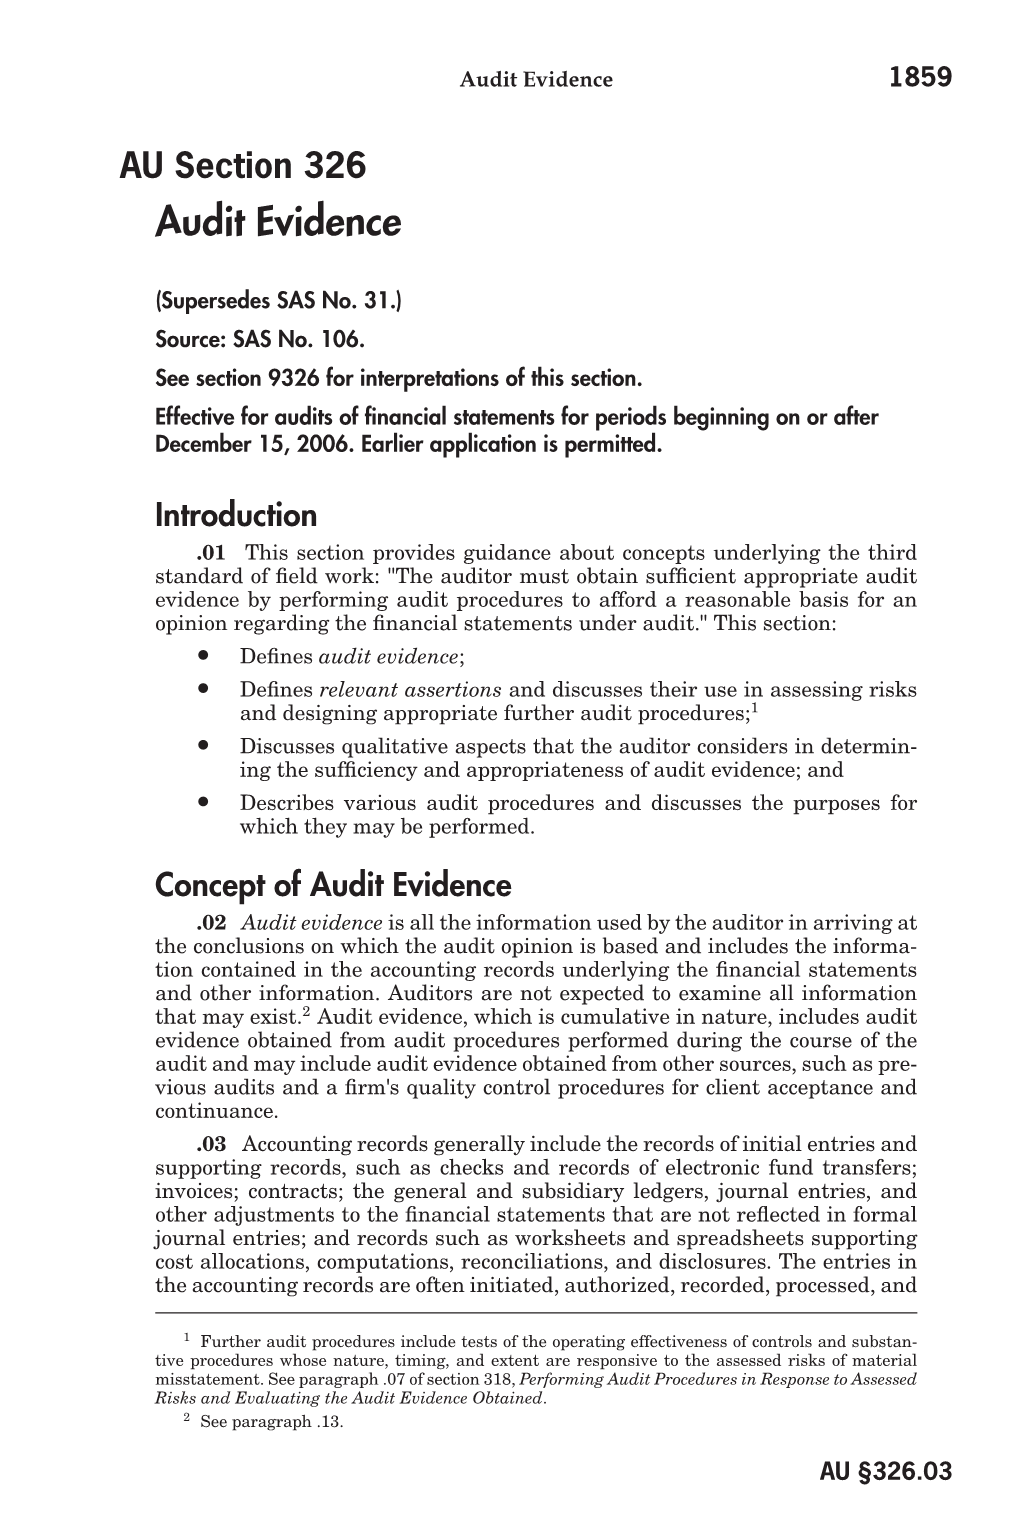 Sufficiency and Appropriateness of Audit Evidence